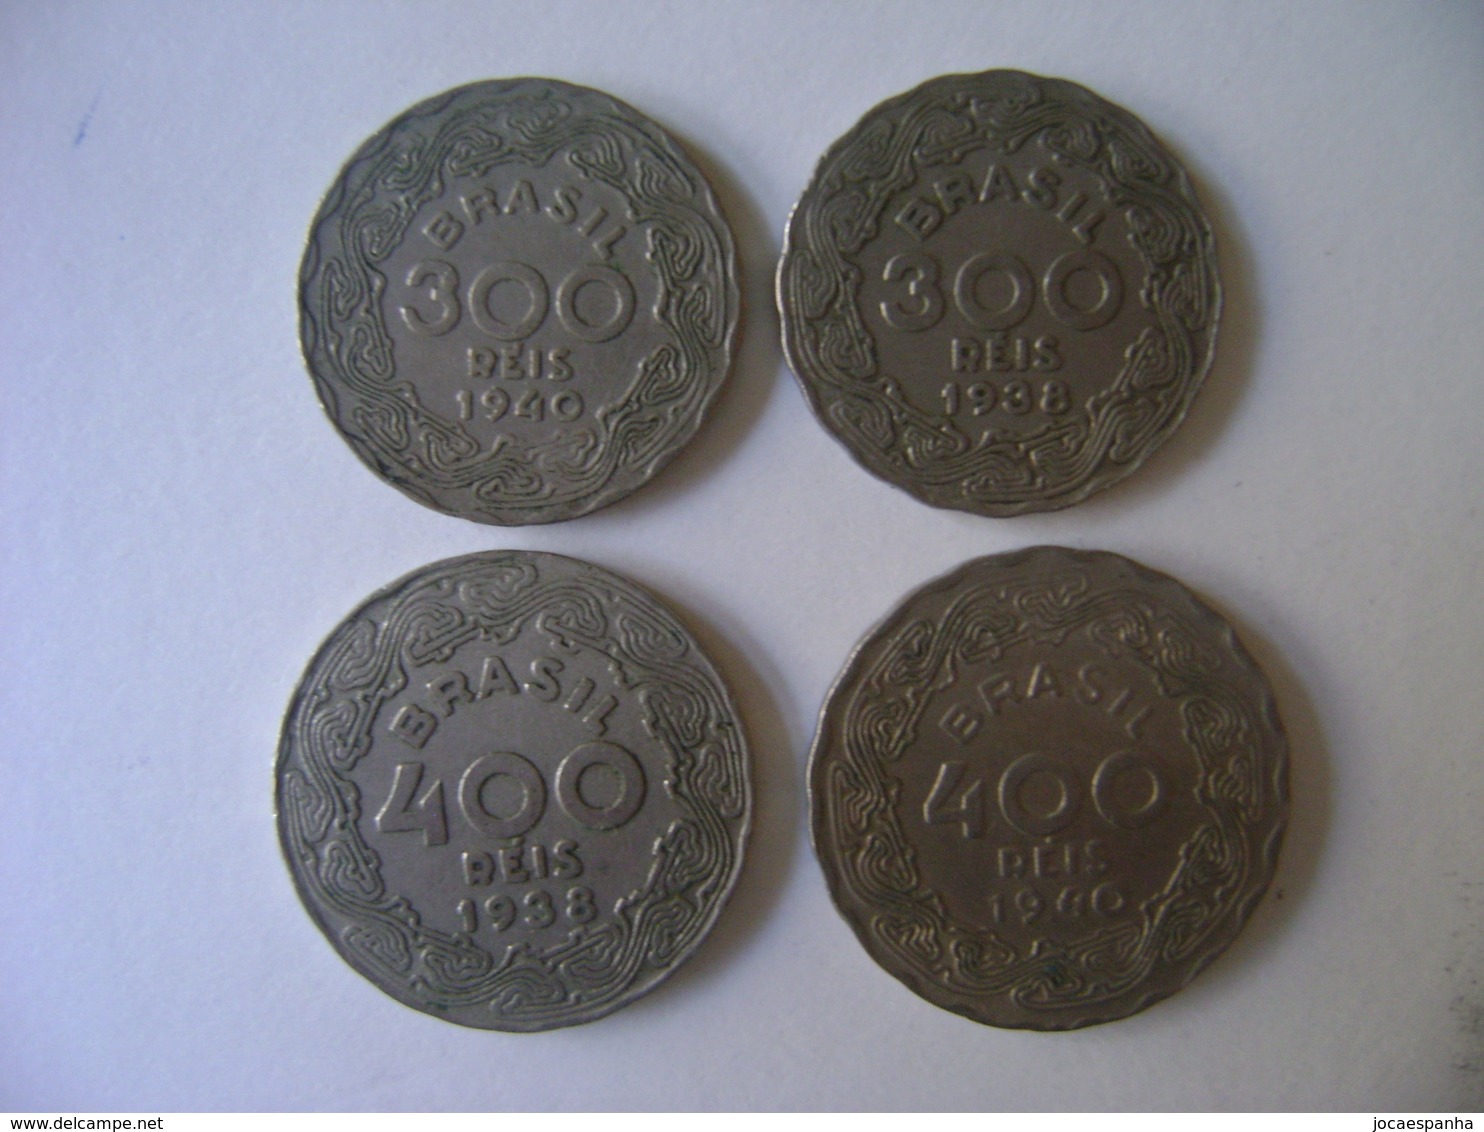 BRAZIL - 4 NICKEL COINS, DIFFERENT DATES (2 OF 400 REIS + 2 OF 300 REIS) 1938 AND 1940 - Brésil